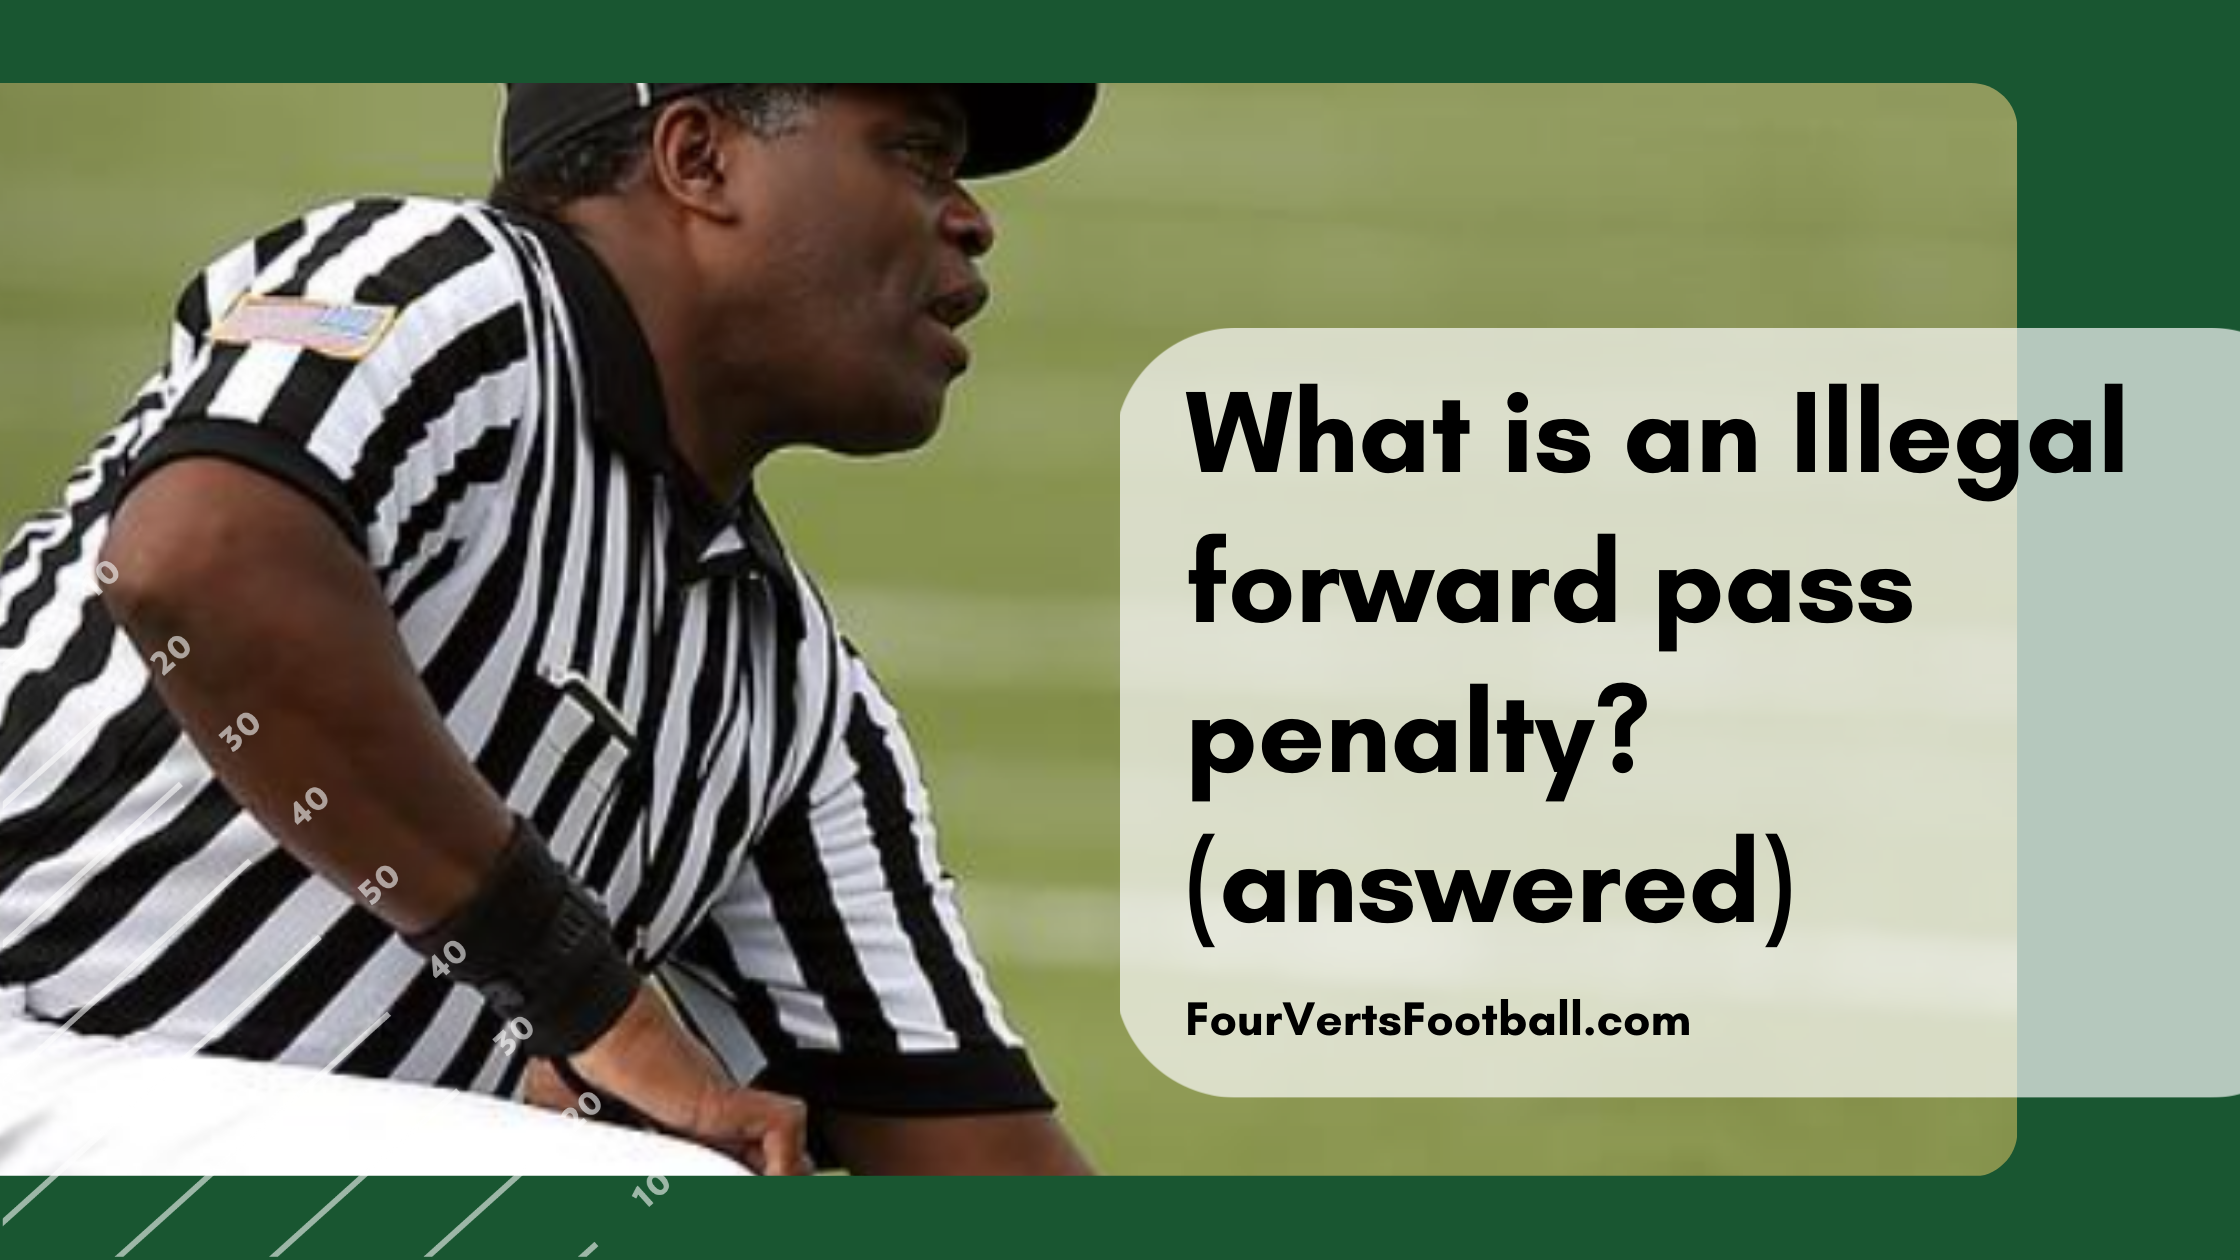 Illegal forward pass penalty